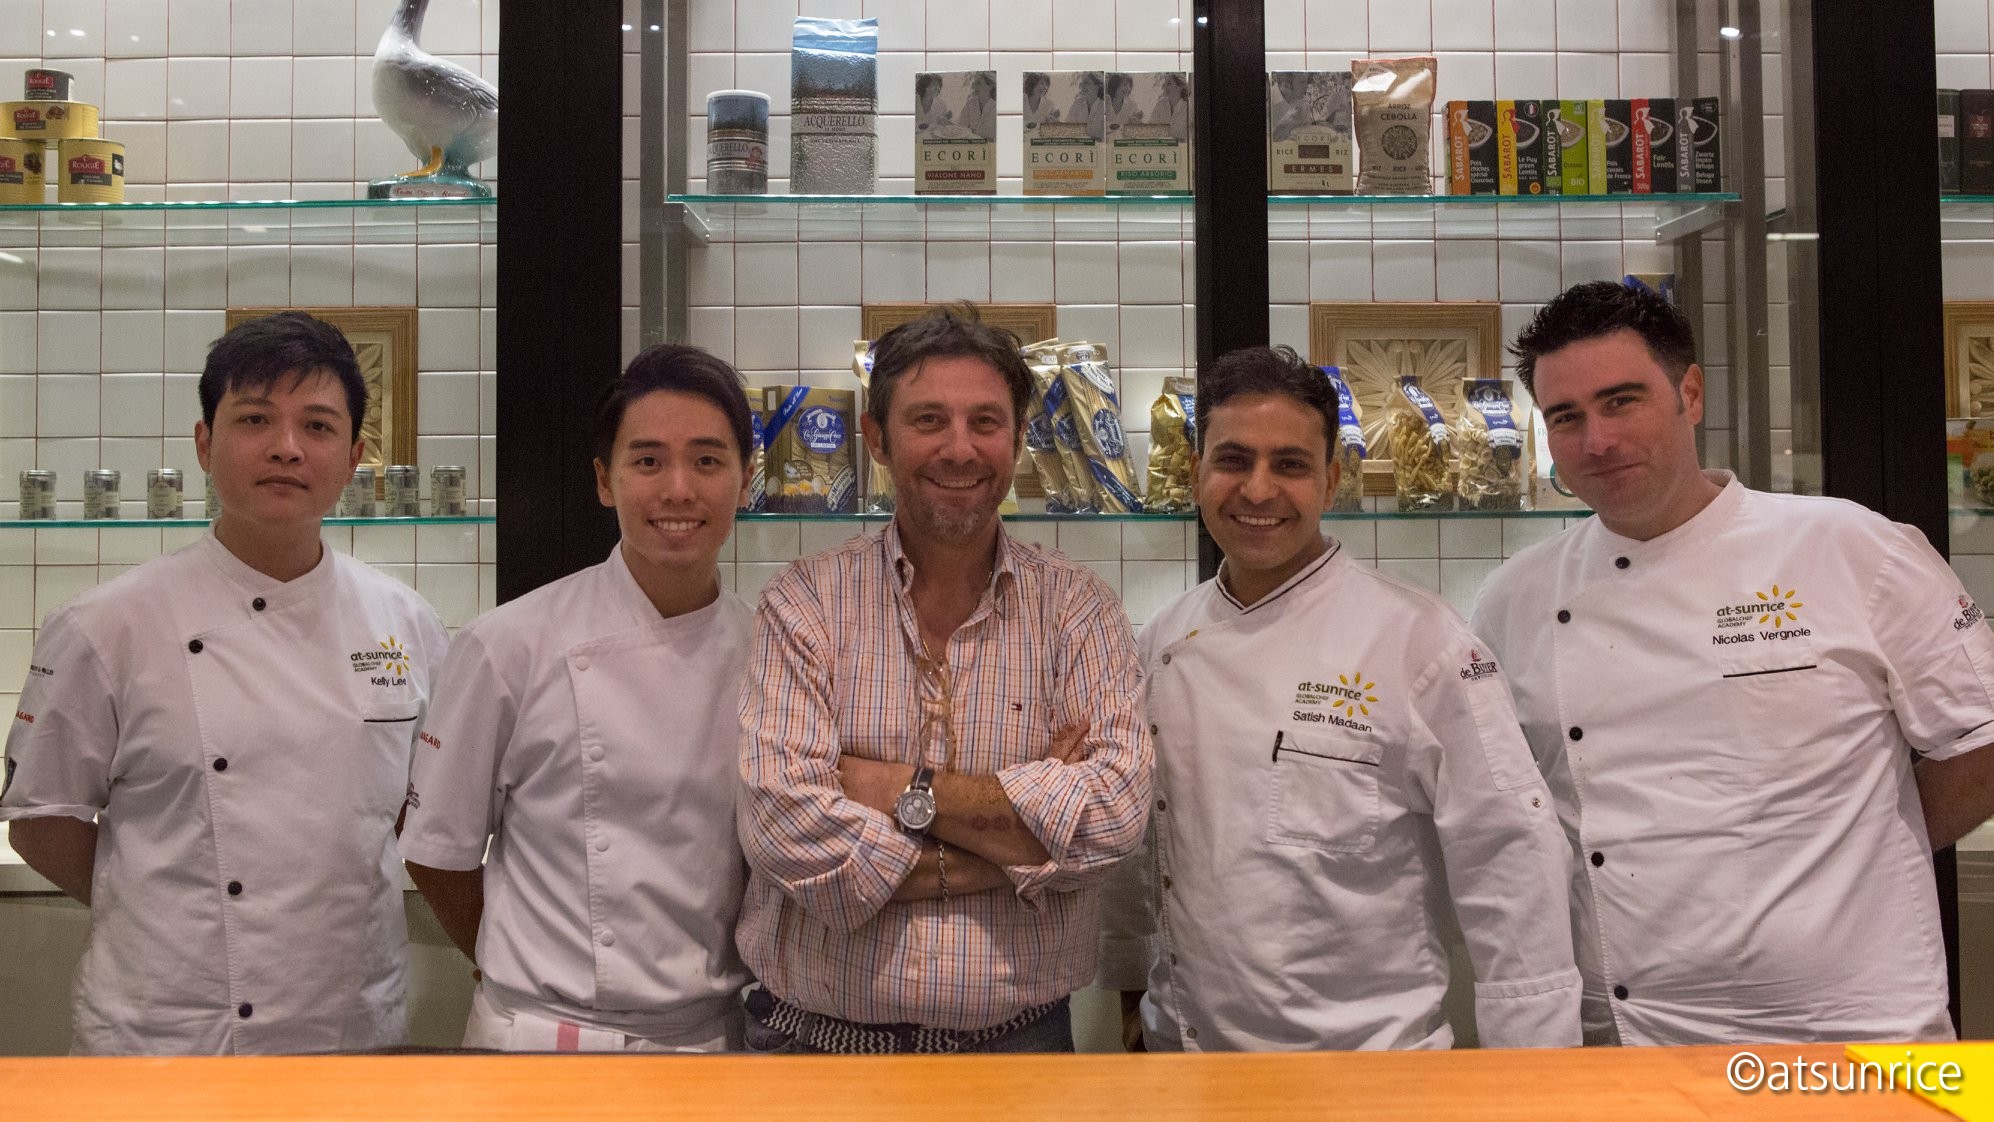 Chef Bruno Menard with Andre and his mentors Chef Kelly Lee and Chef Satish Madaan
